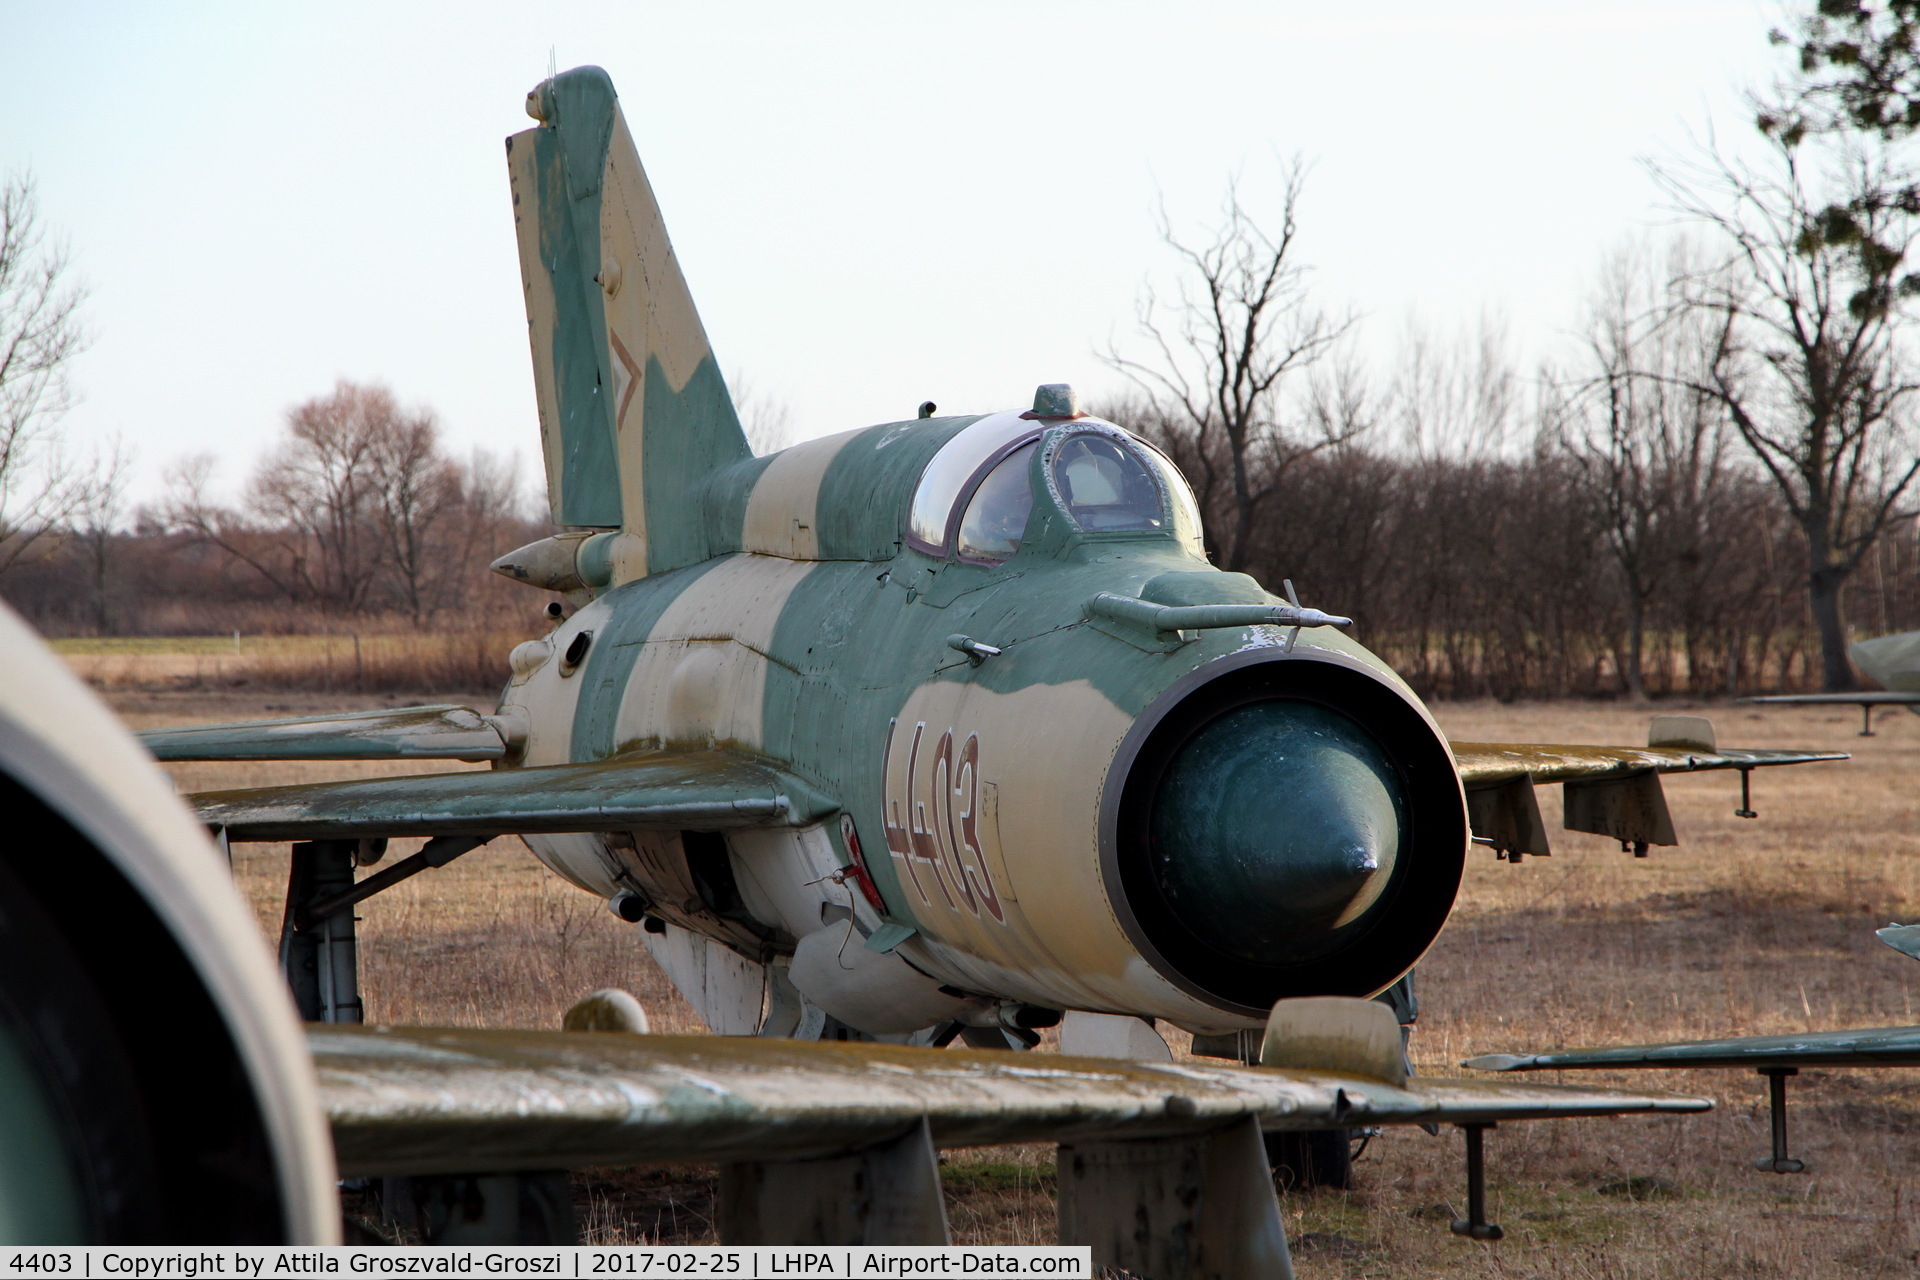 4403, Mikoyan-Gurevich MiG-21MF C/N 964403, Pápa stored off-site airport, Hungary